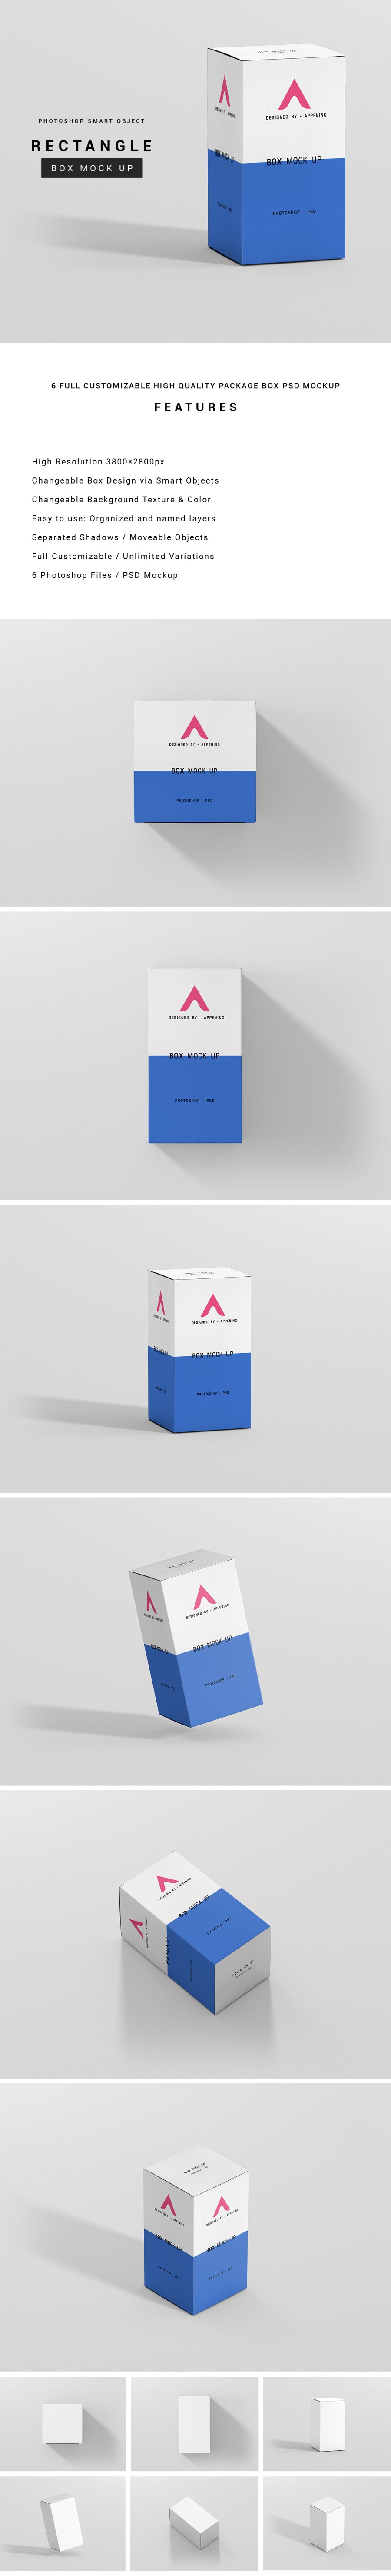 Download Free Huge Set of Clean Rectangle Packaging Boxes PSD ...